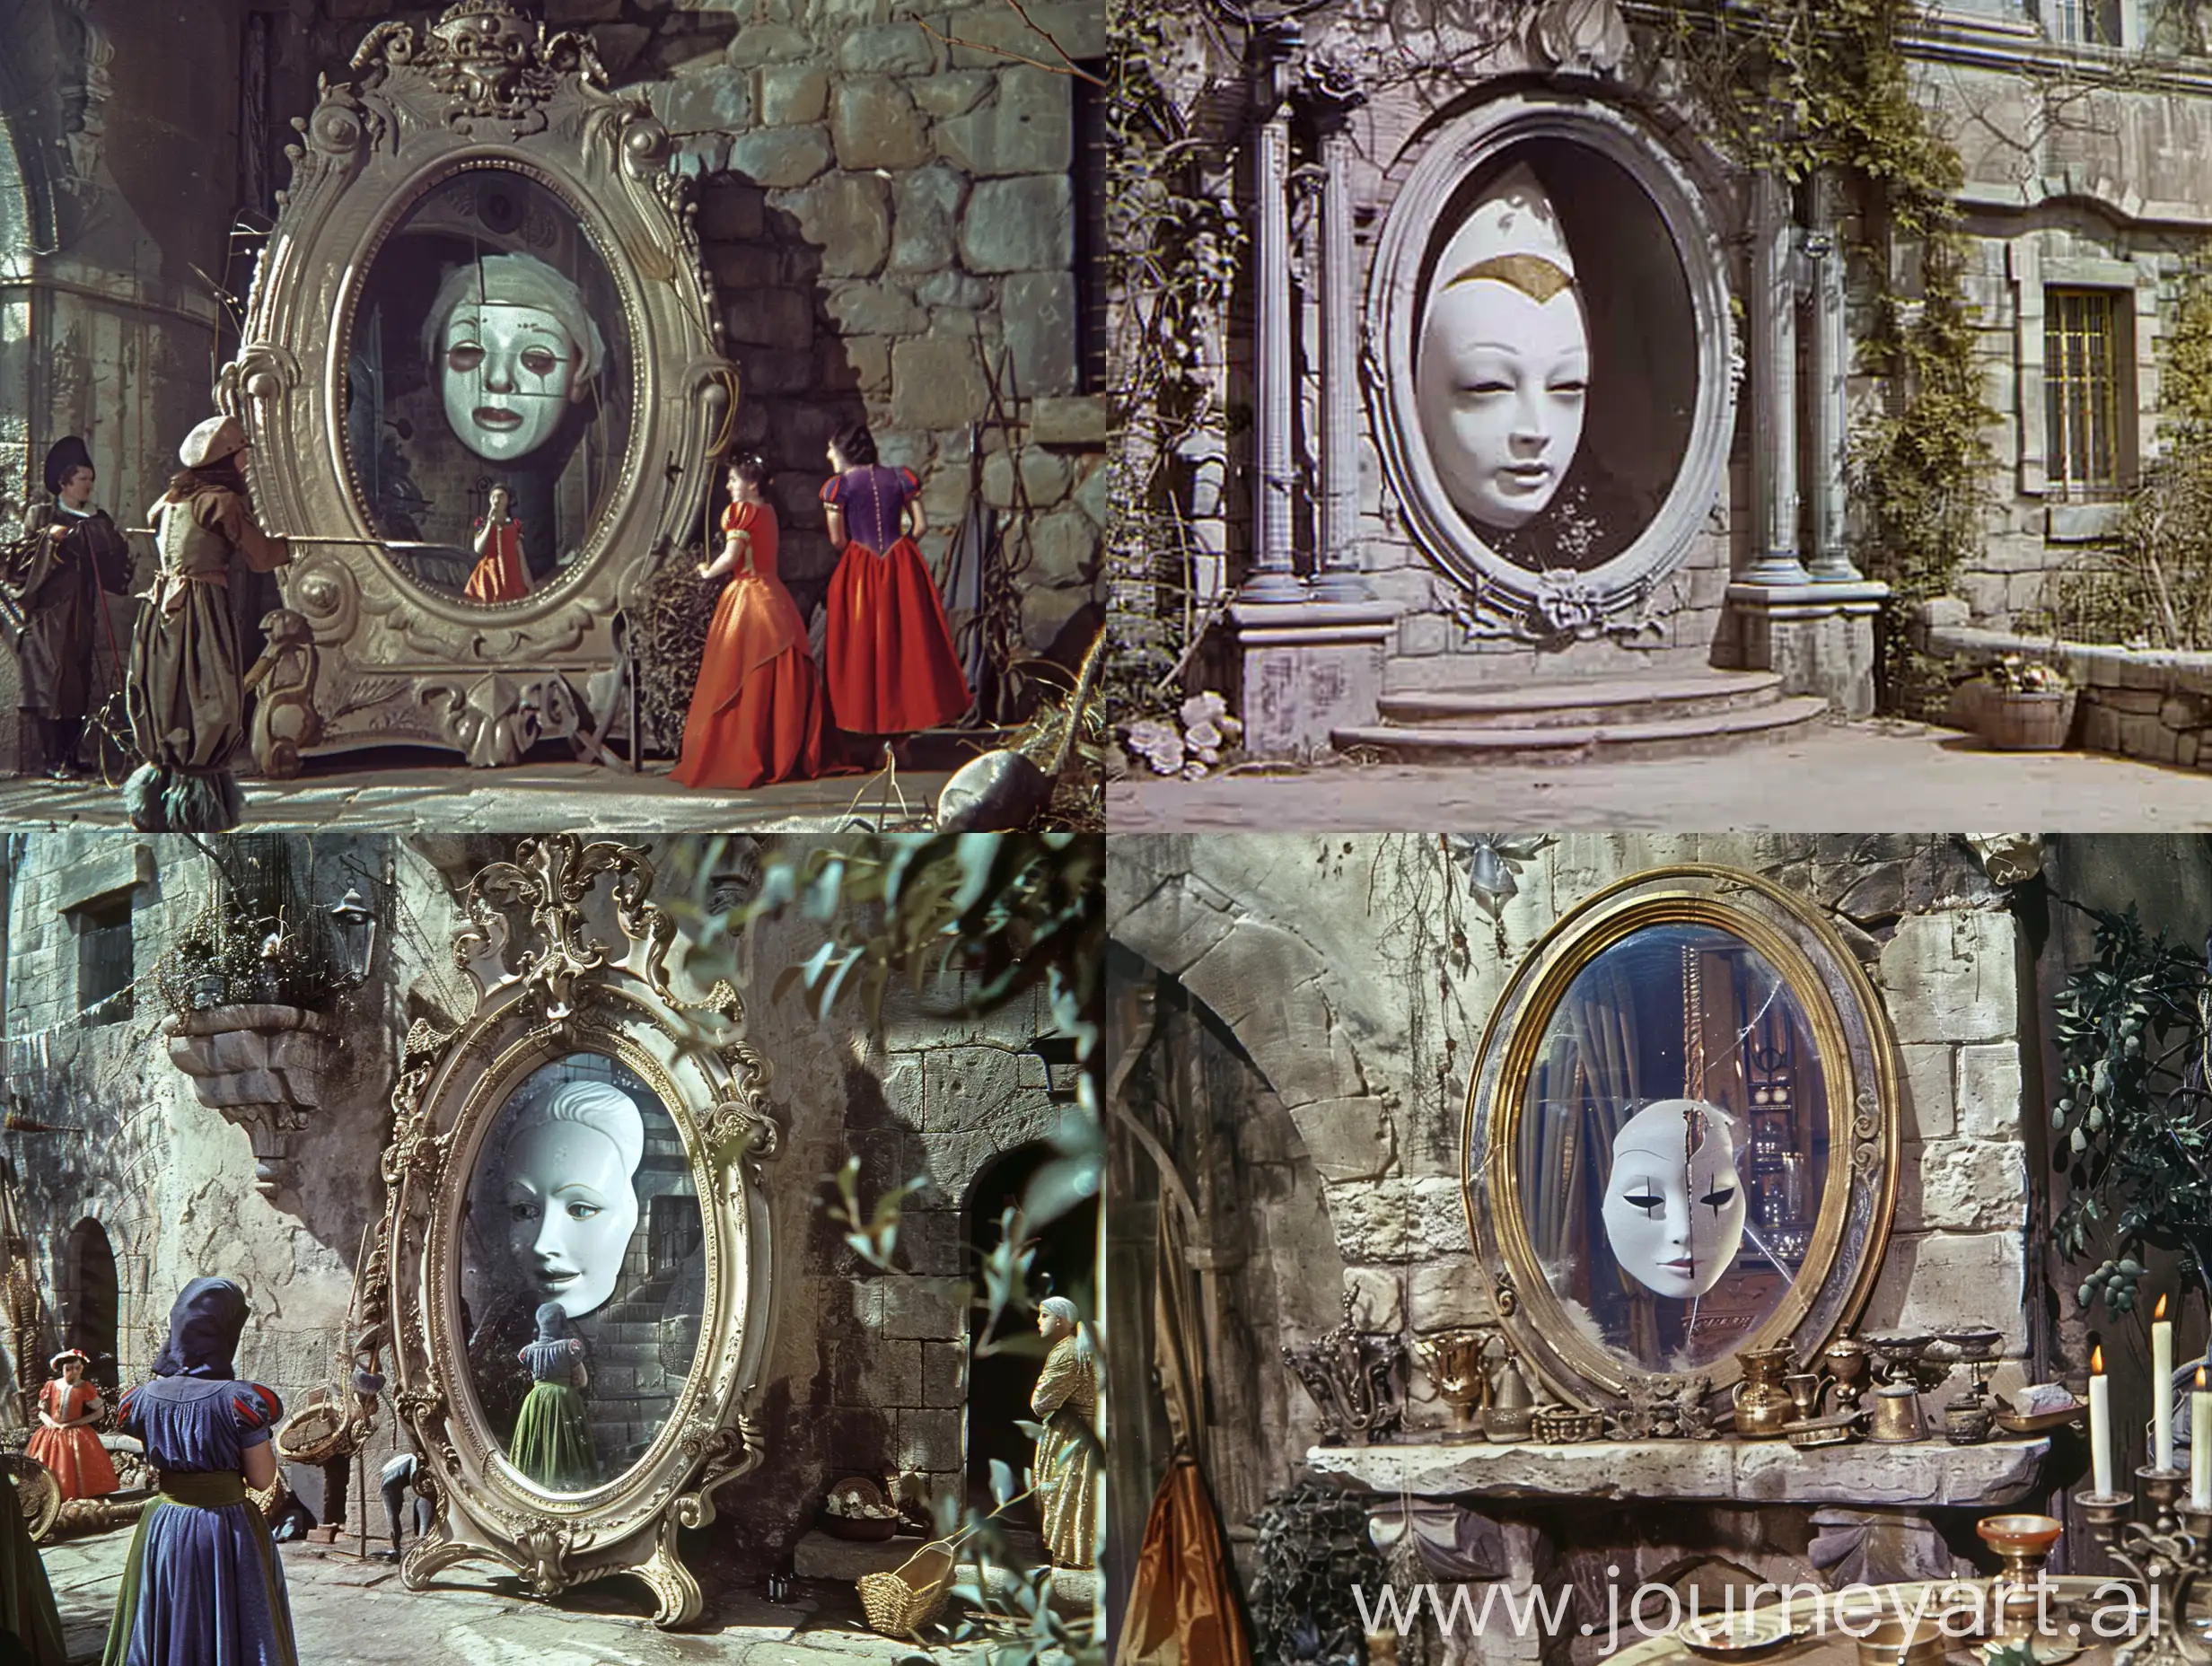 The magic big mirror of the story of Snow White. There is a face  like a white mask inside the mirror and it is talking.mirror on the castel,1950's Superpanavision 70 , vintage color 